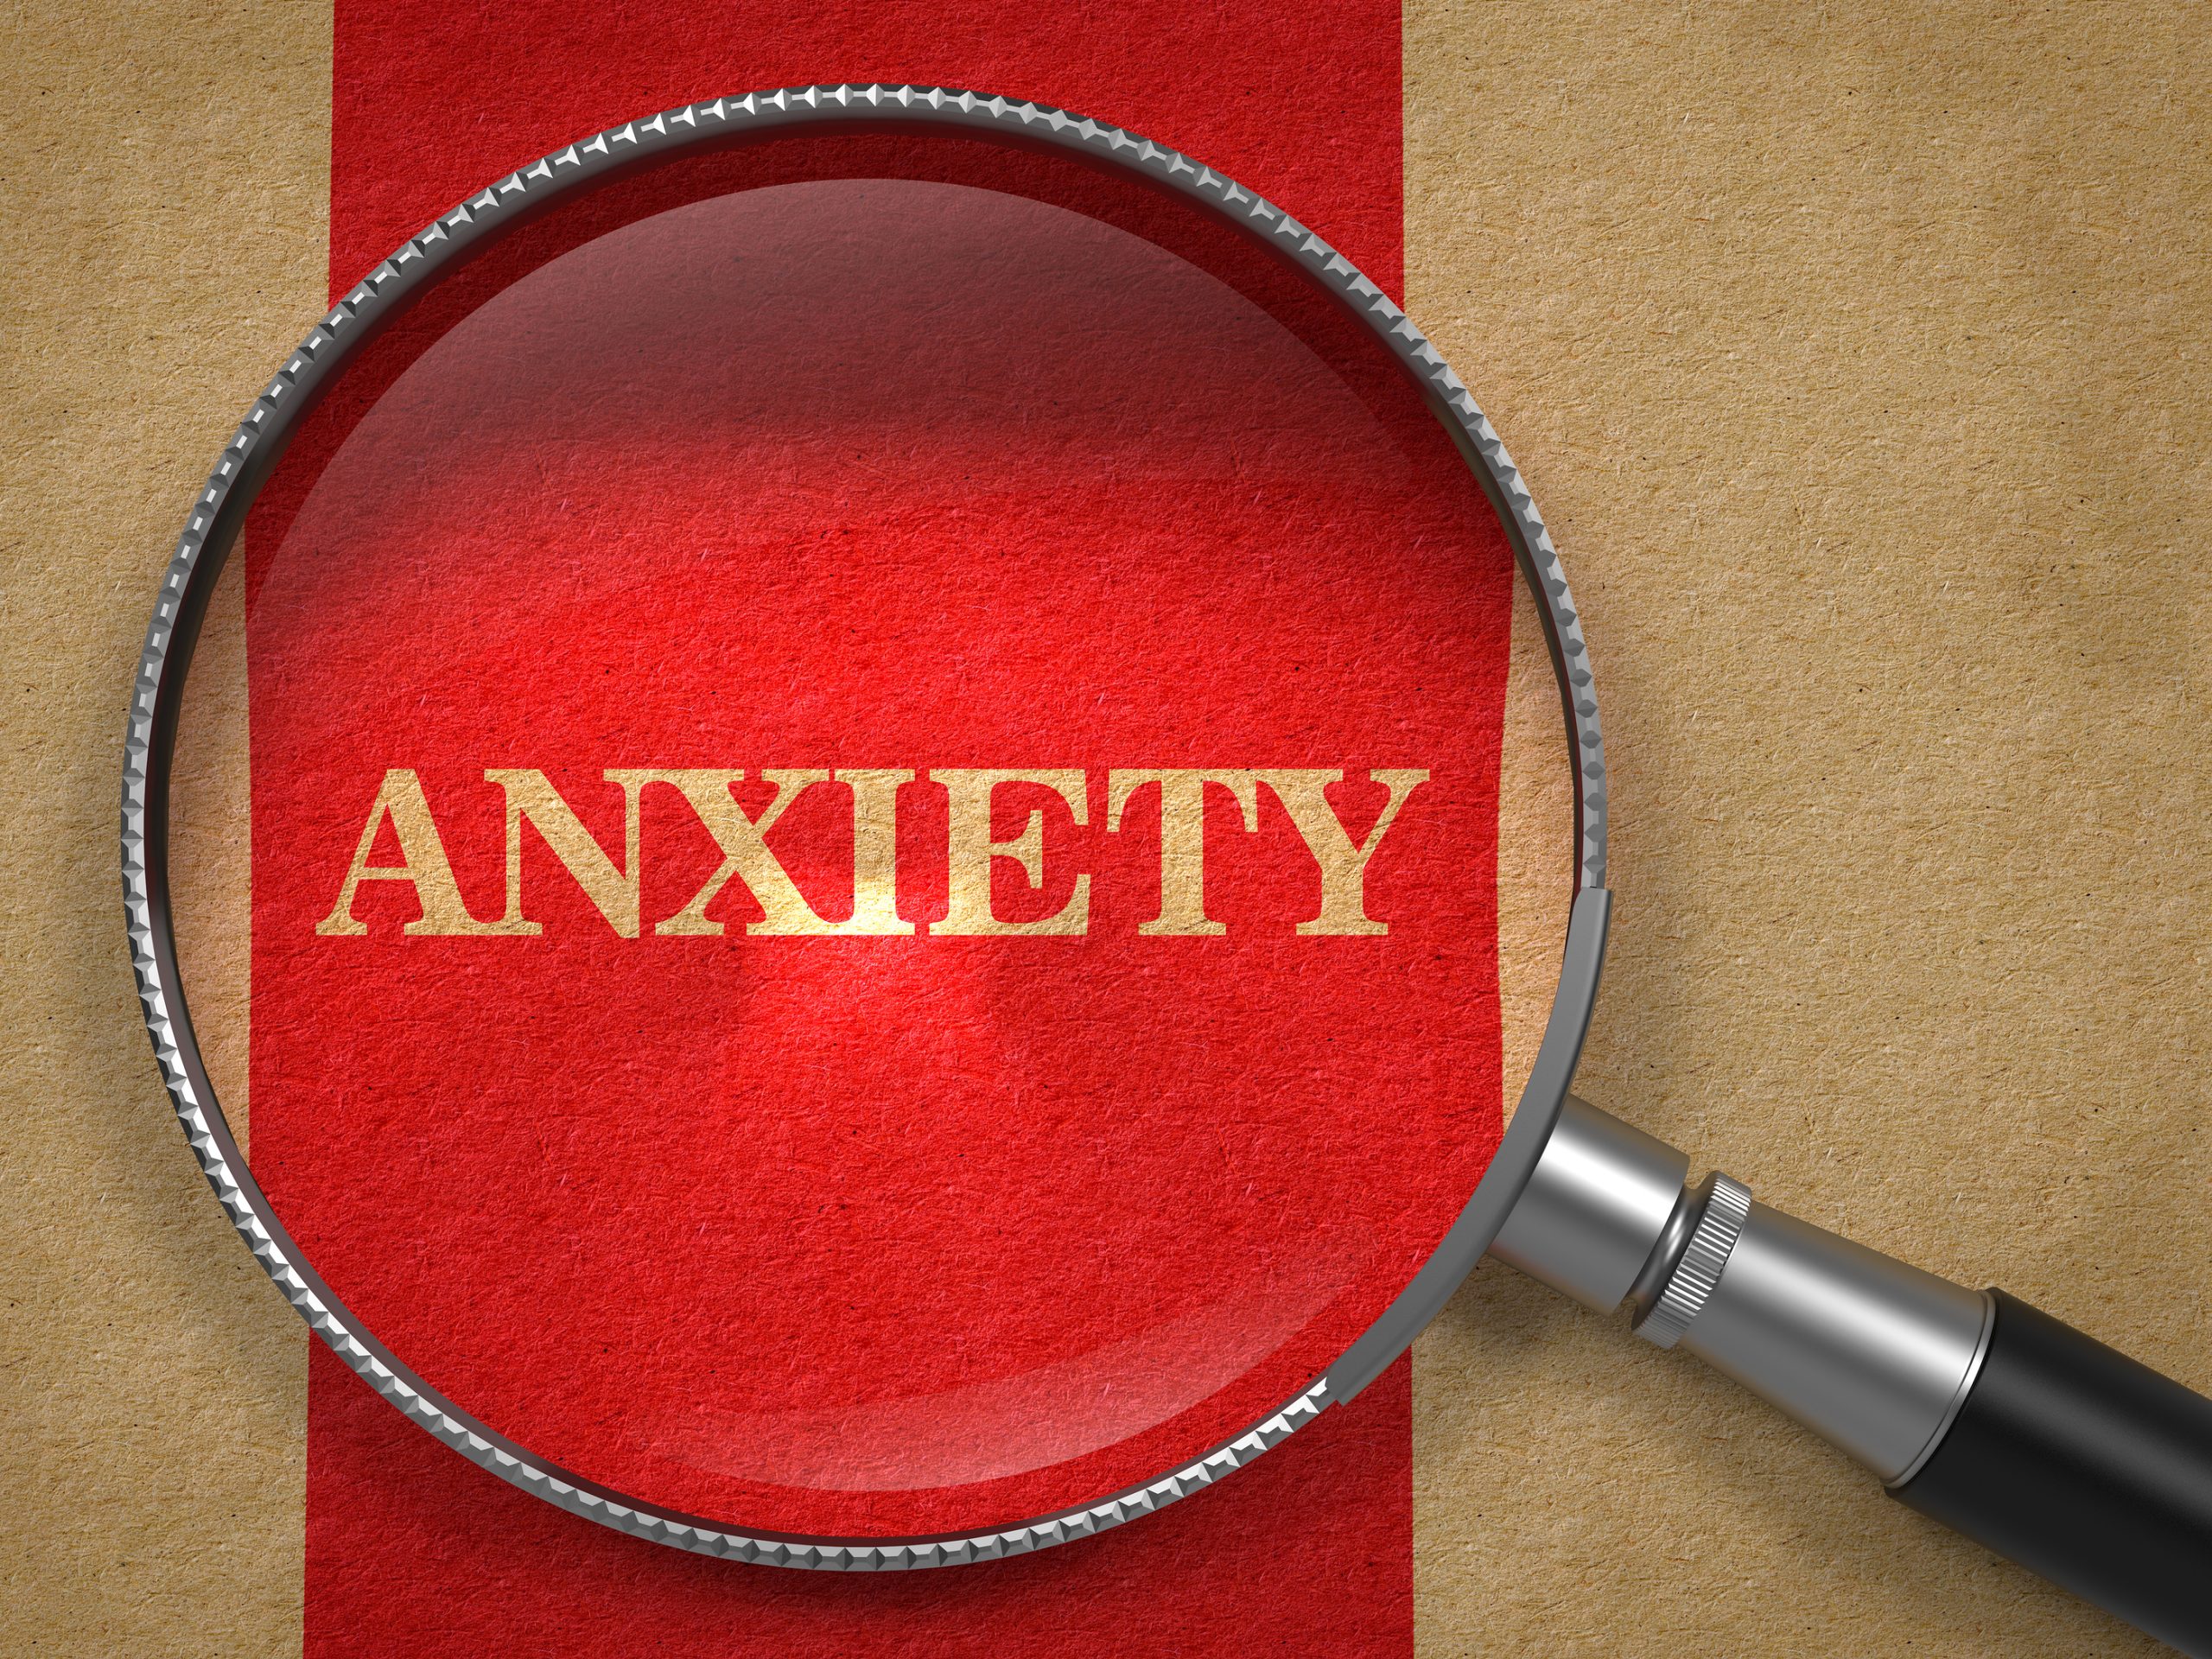 Some ways your church can support people with Anxiety |Mental Health and the Church